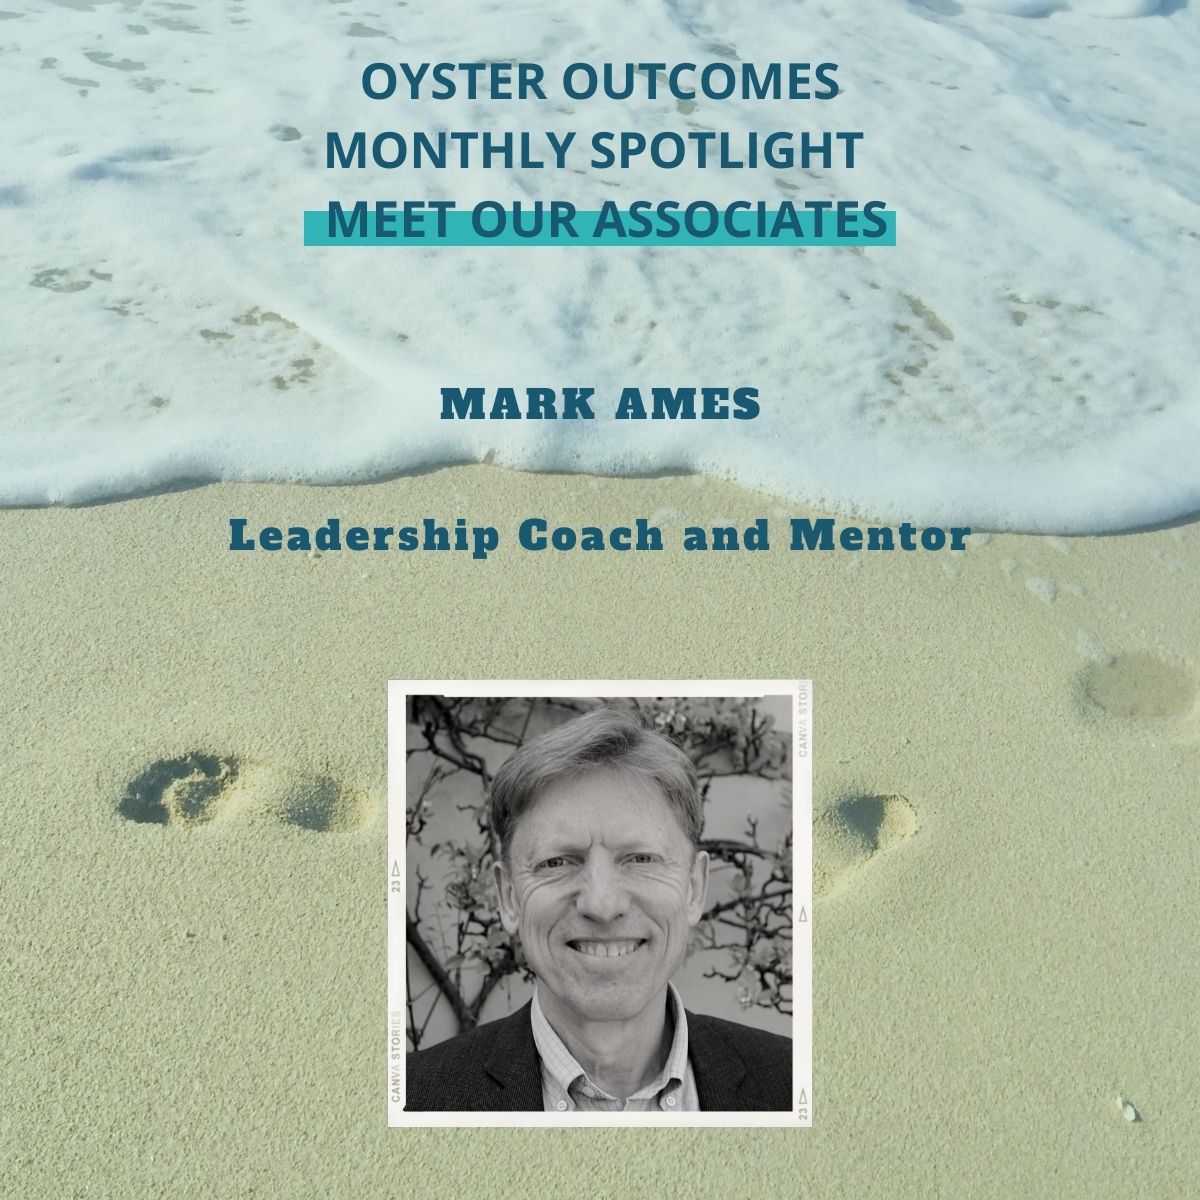 This month’s spotlight, Mark Ames